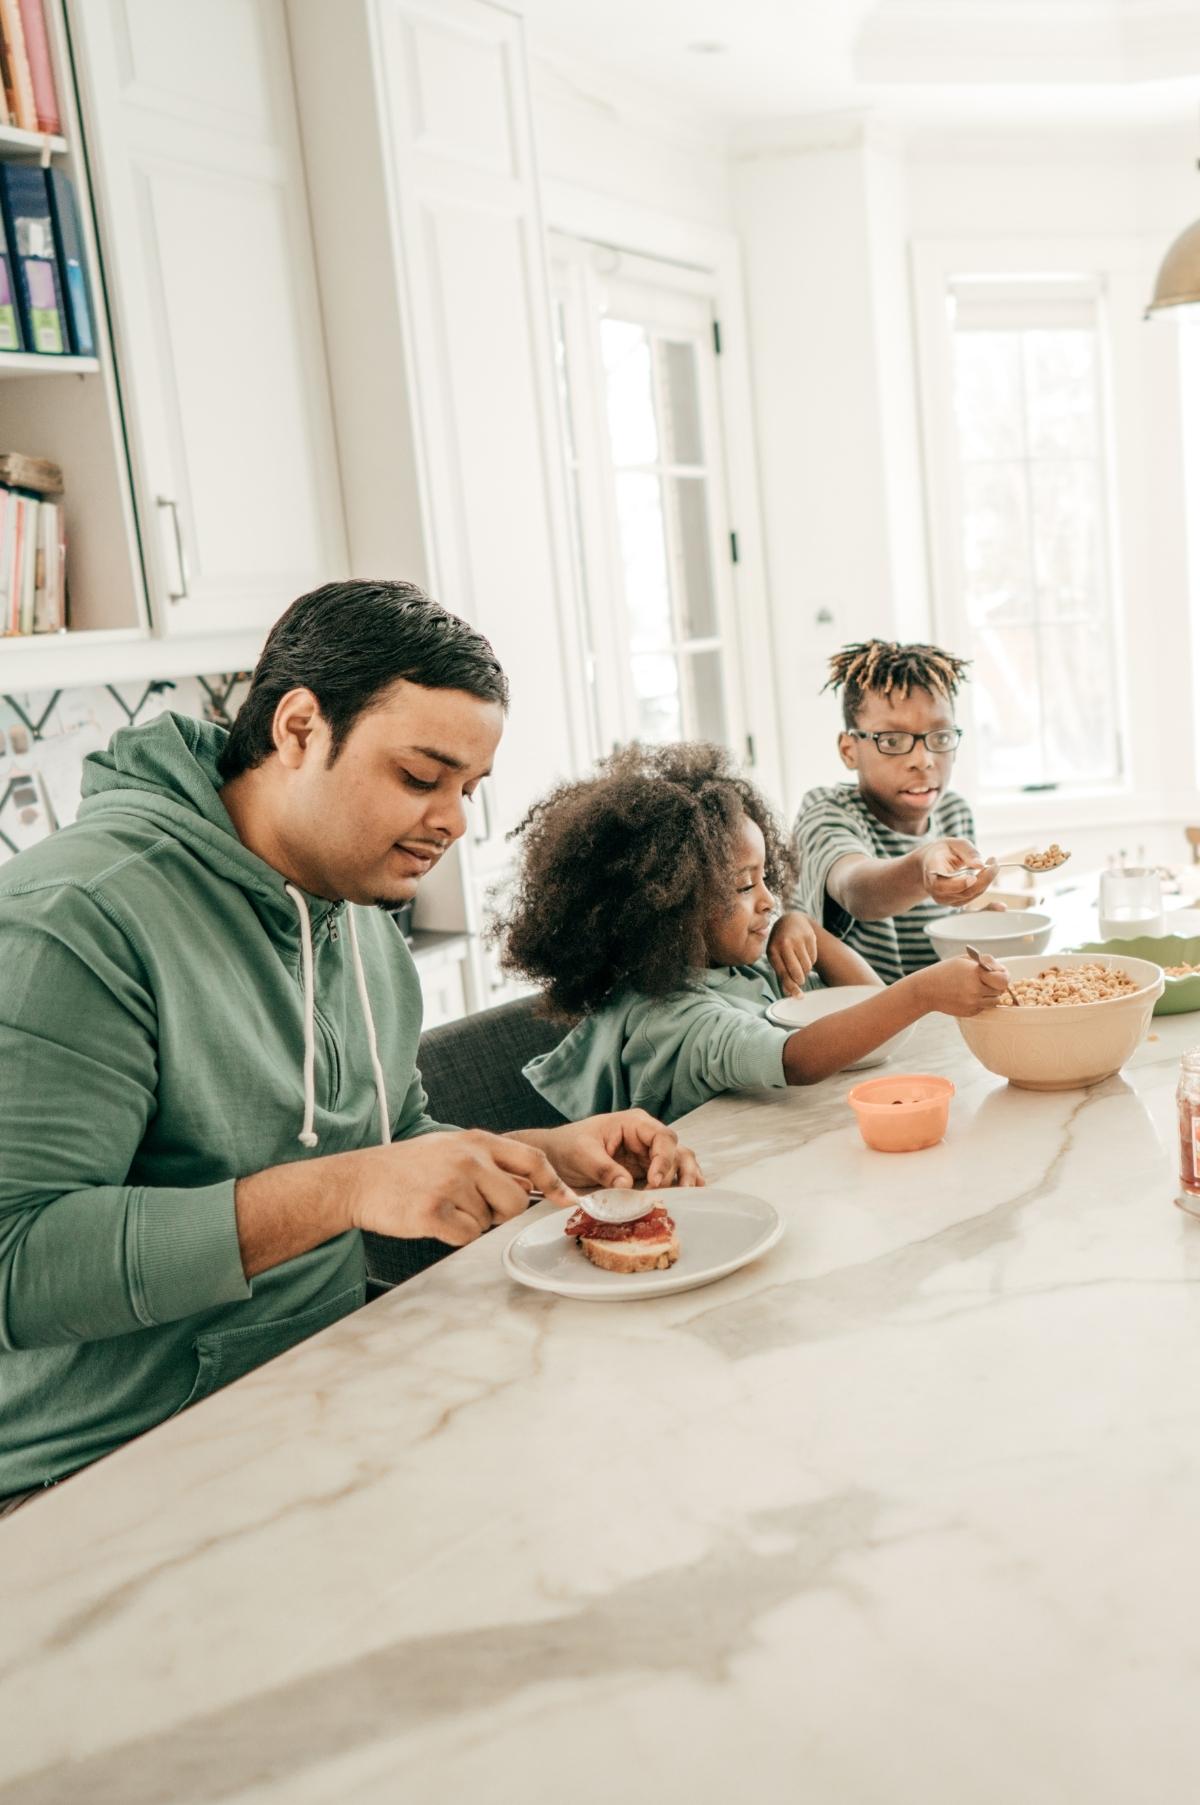 Do you feel guilty for not having family dinner every night? Stop! There are great reasons why you should give yourself a break and not do this every night.